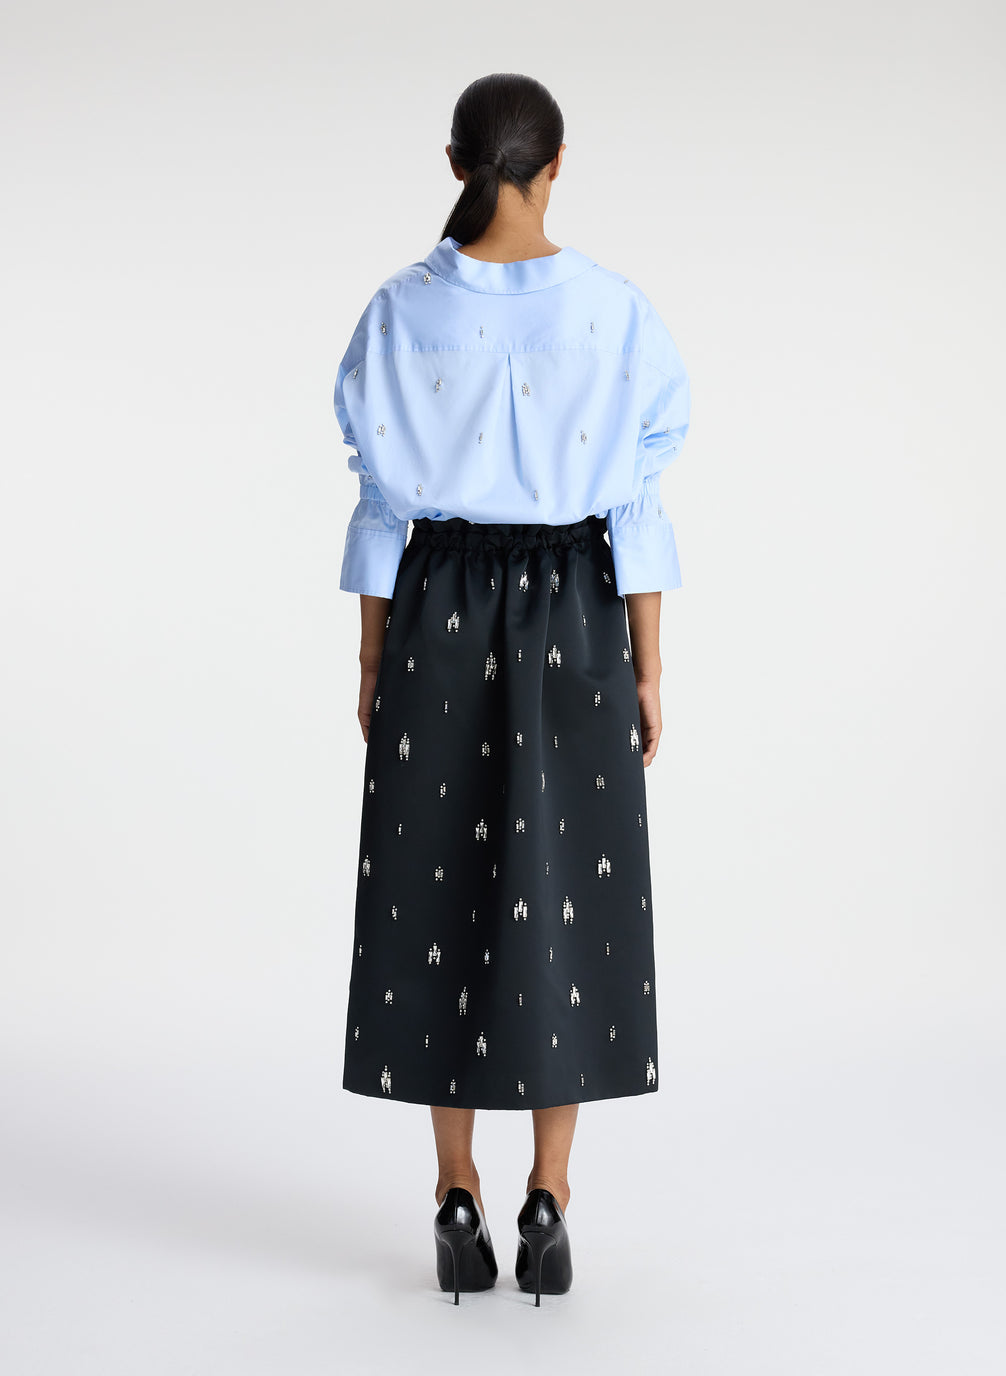 back view of woman wearing blue embellished button down top and black embellished midi skirt